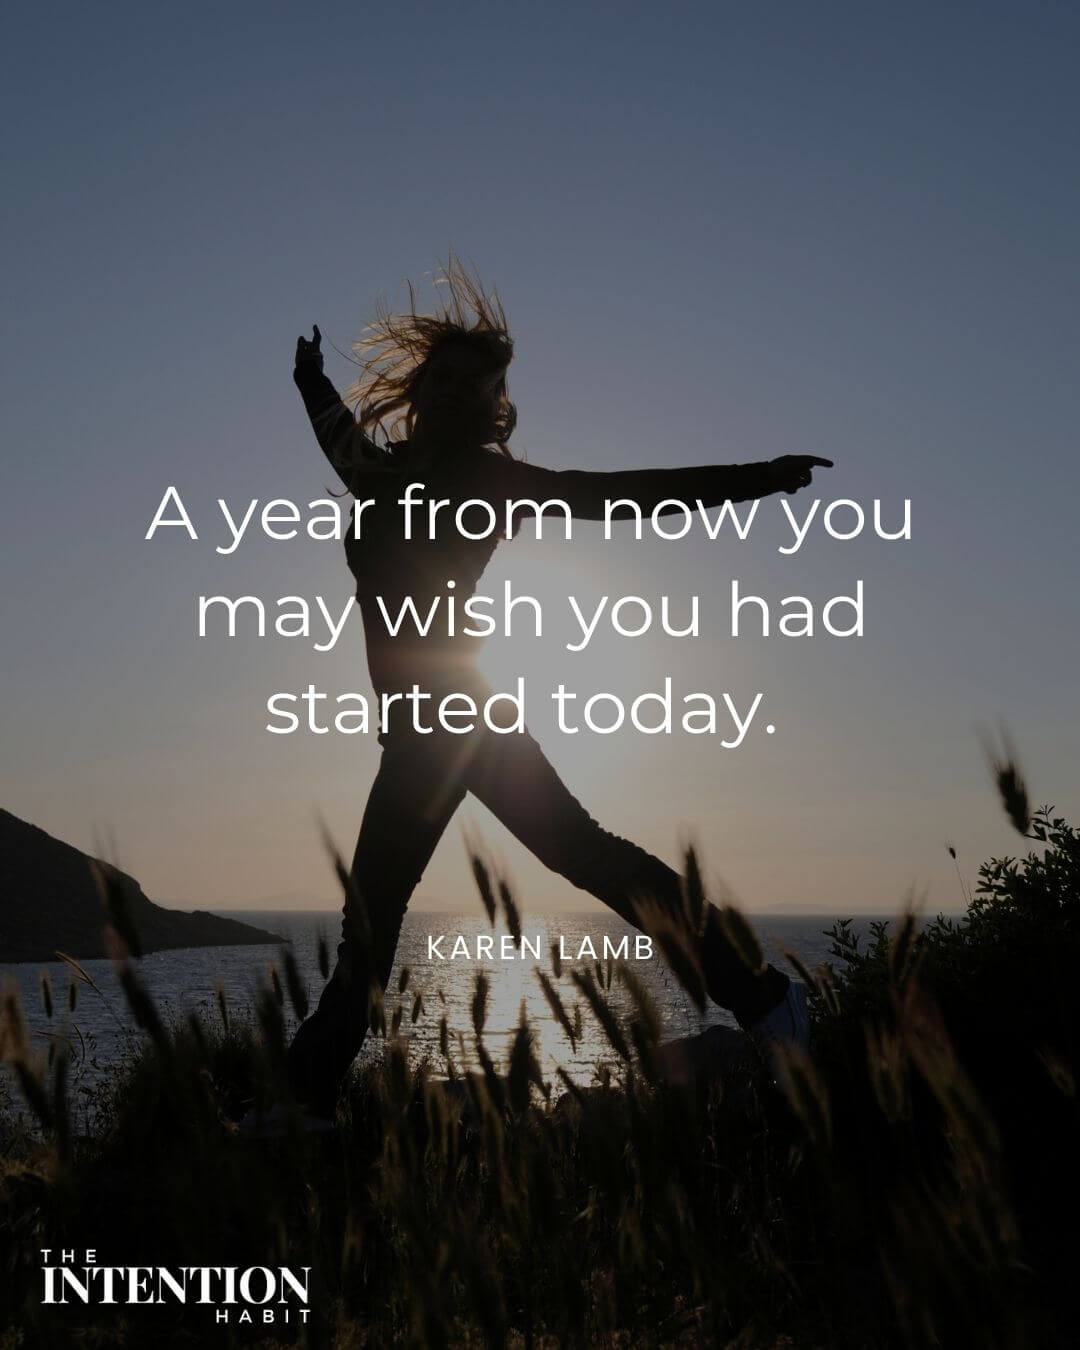 Intentional living quote - A year from now you may wish you had started today